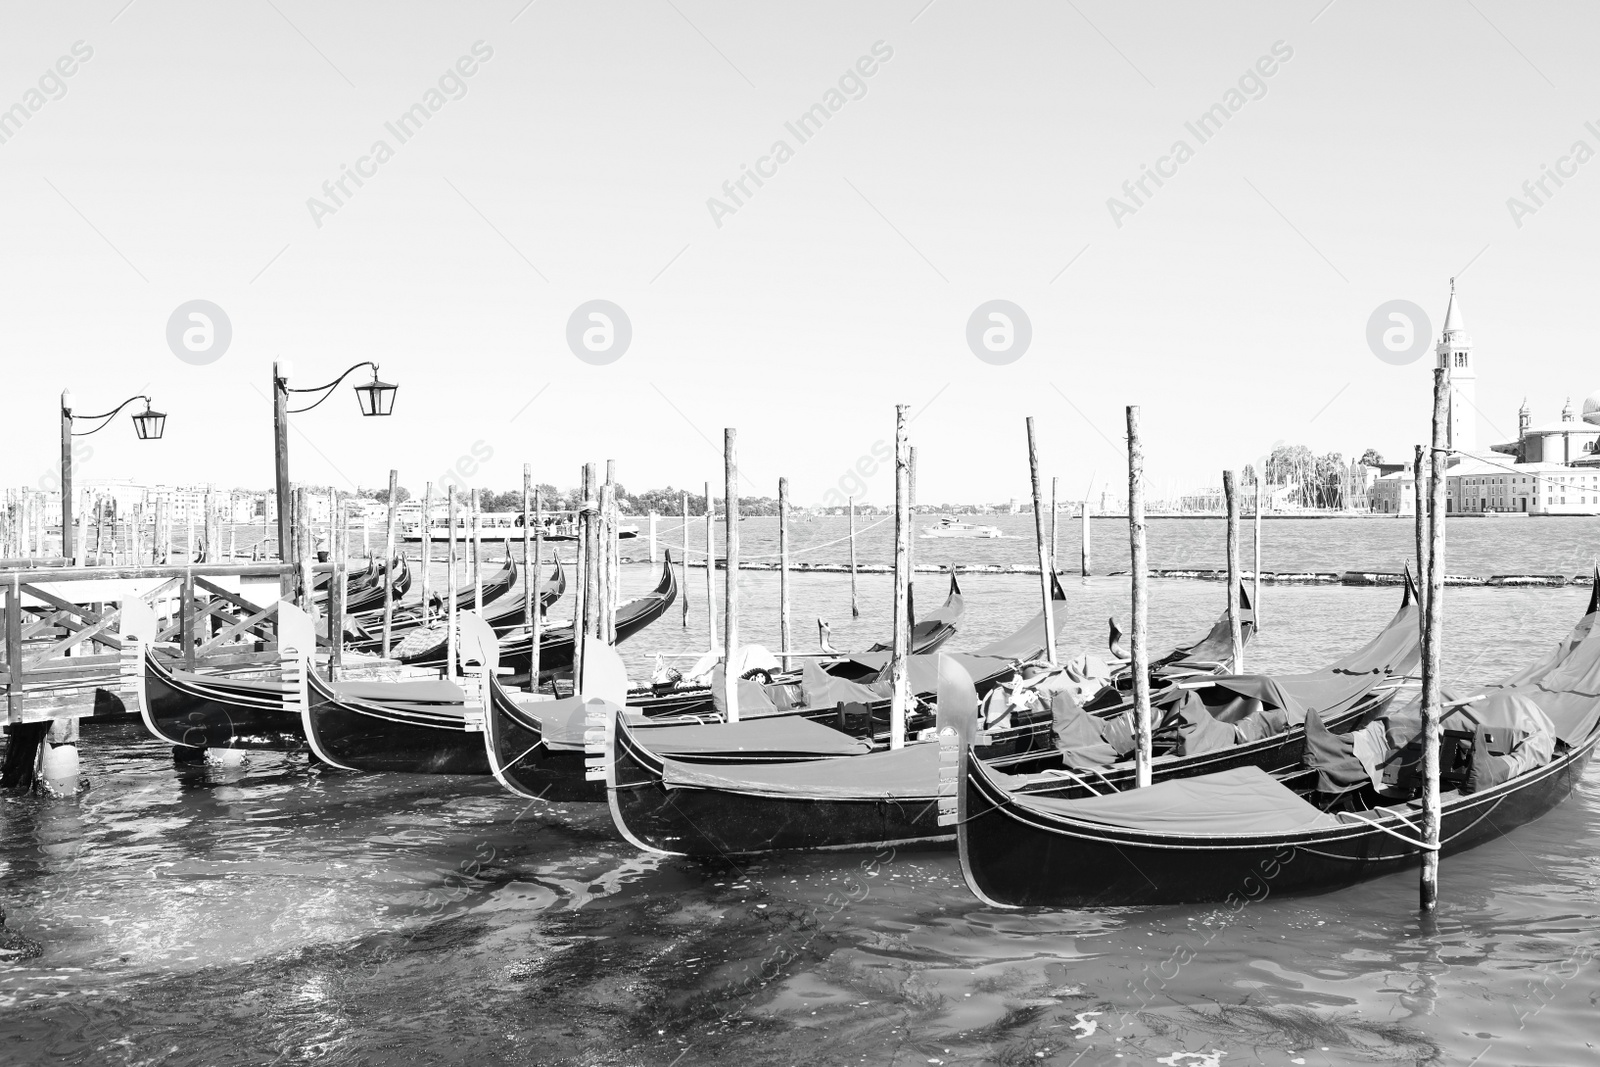 Image of VENICE, ITALY - JUNE 13, 2019: Different gondolas at pier. Black and white tone 